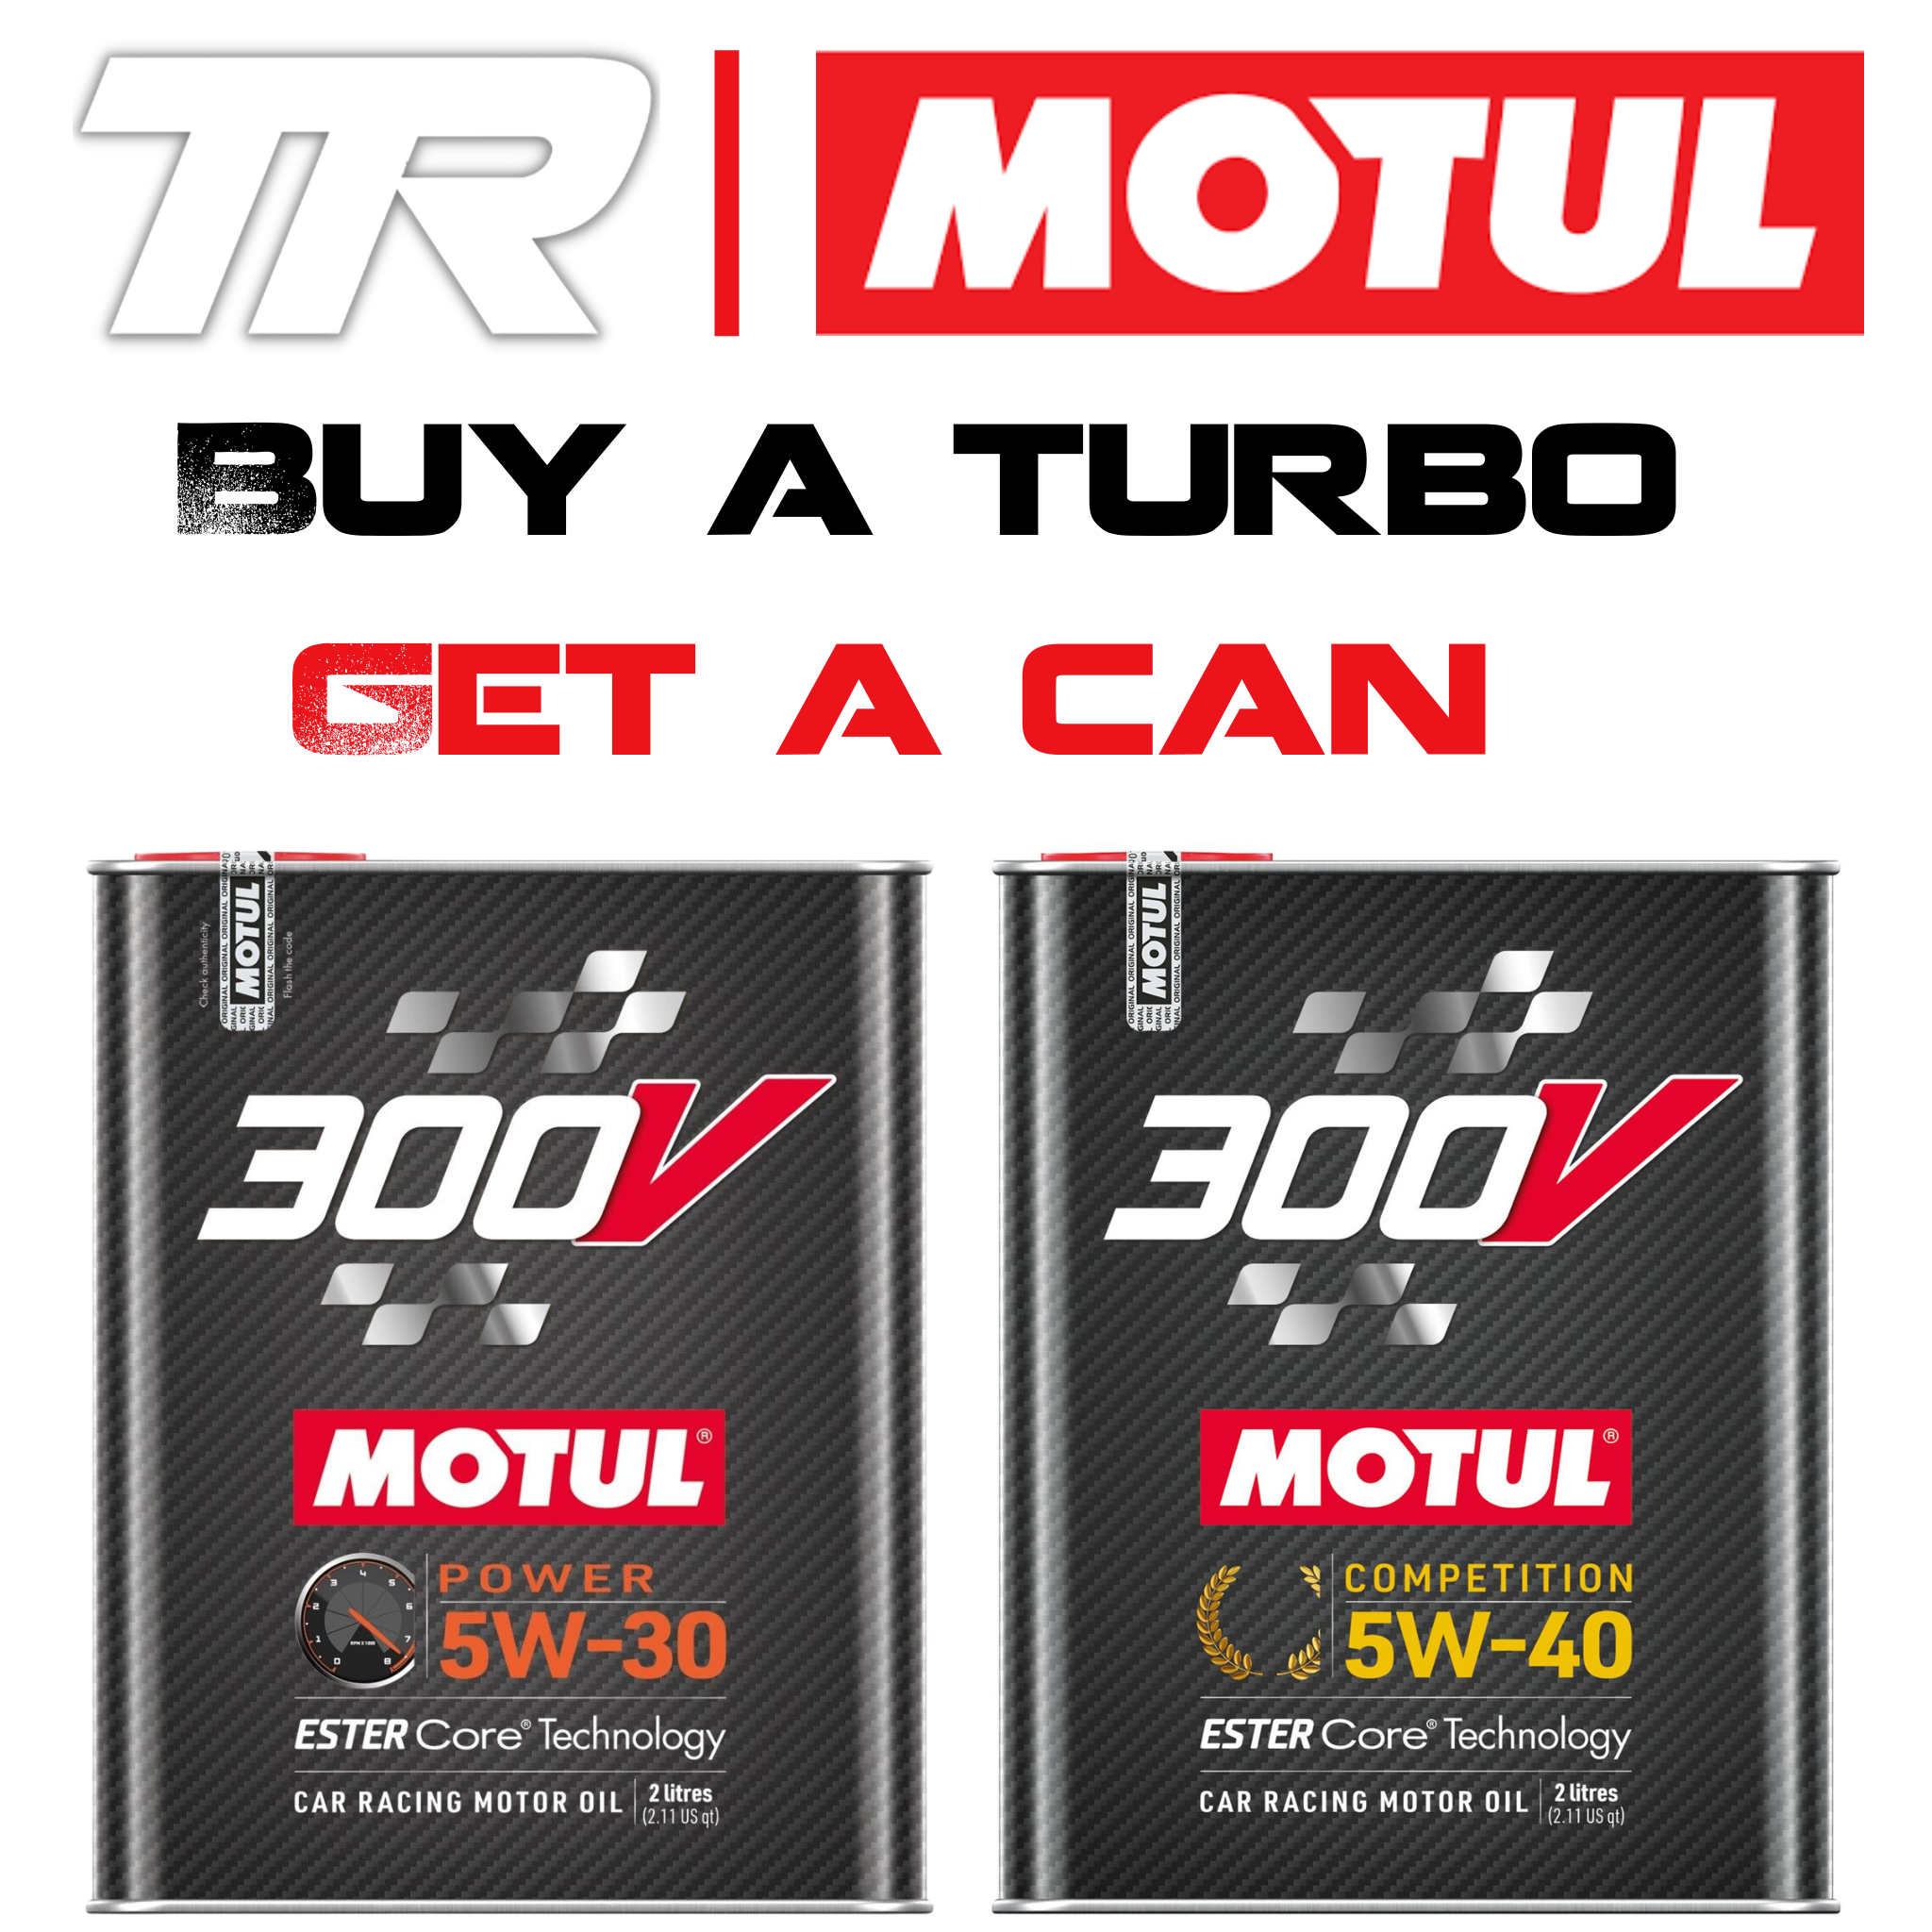 TR IHX600 - Turbo Upgrade For VW / AUDI EA888 Gen 3 (MQB) and Motul 300V Power &  Competition